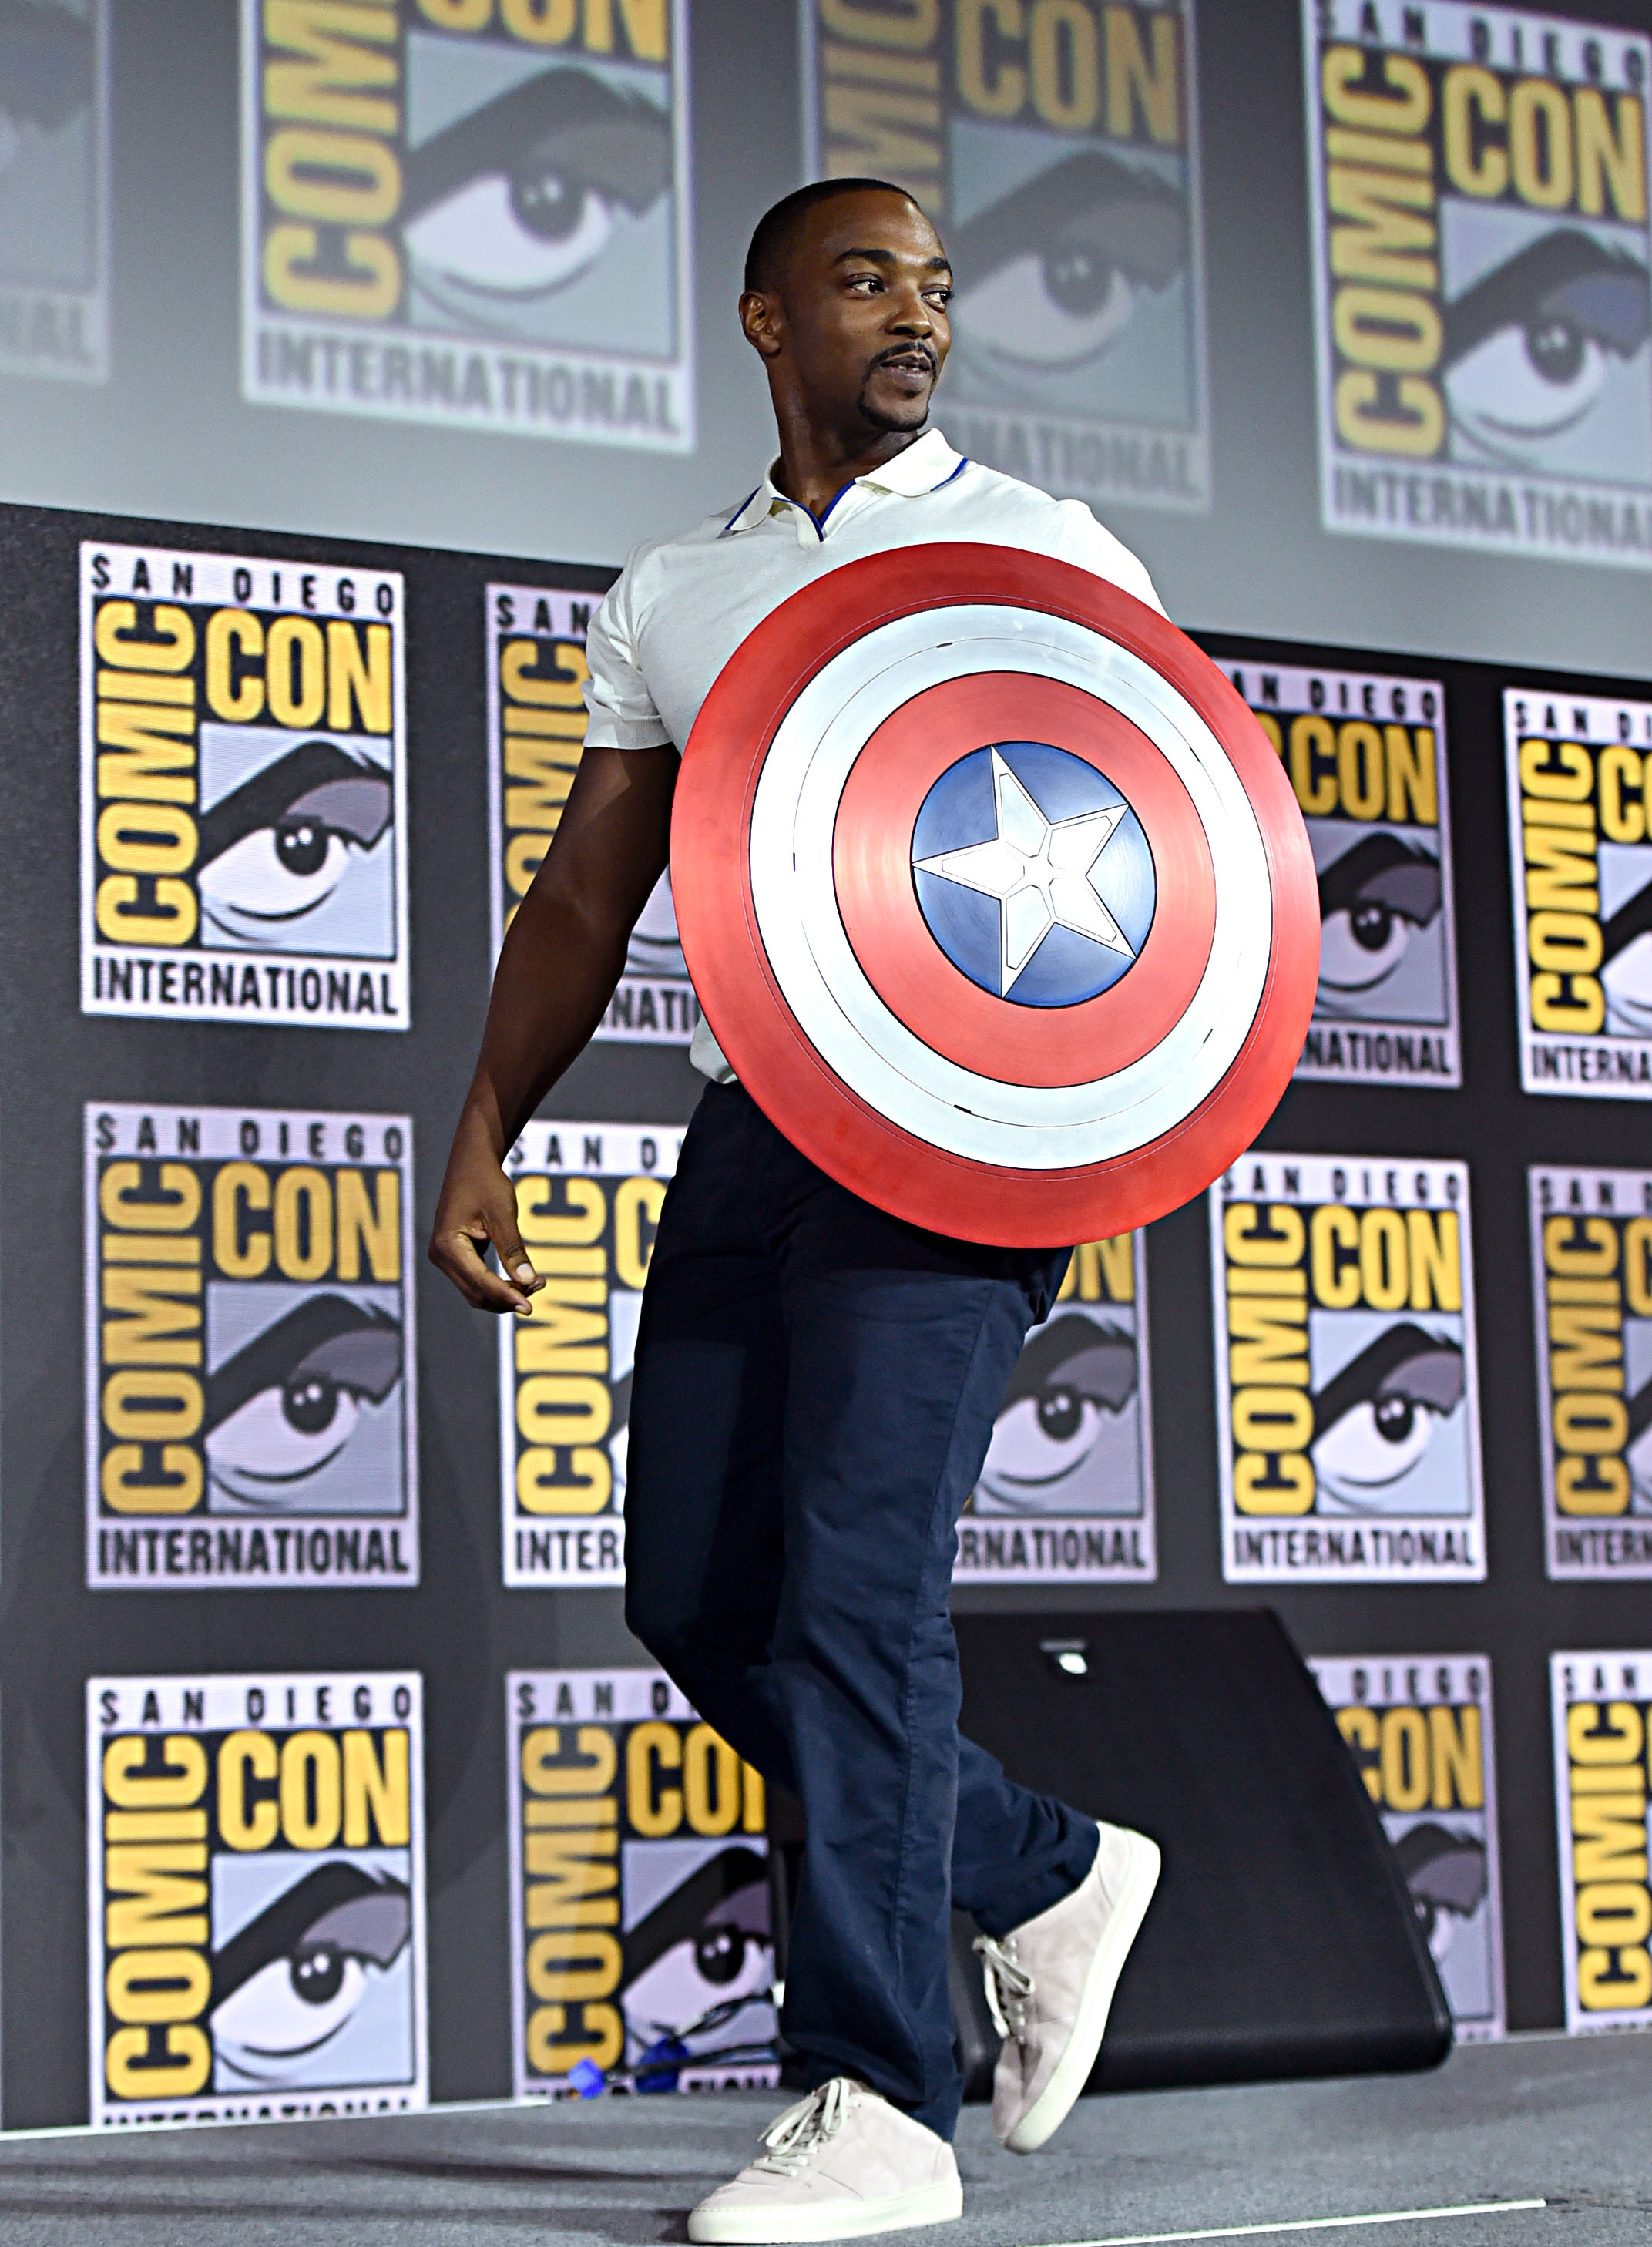 Anthony Mackie arrives to the Marvel Studios Hall H Panel holding the Captain America shield